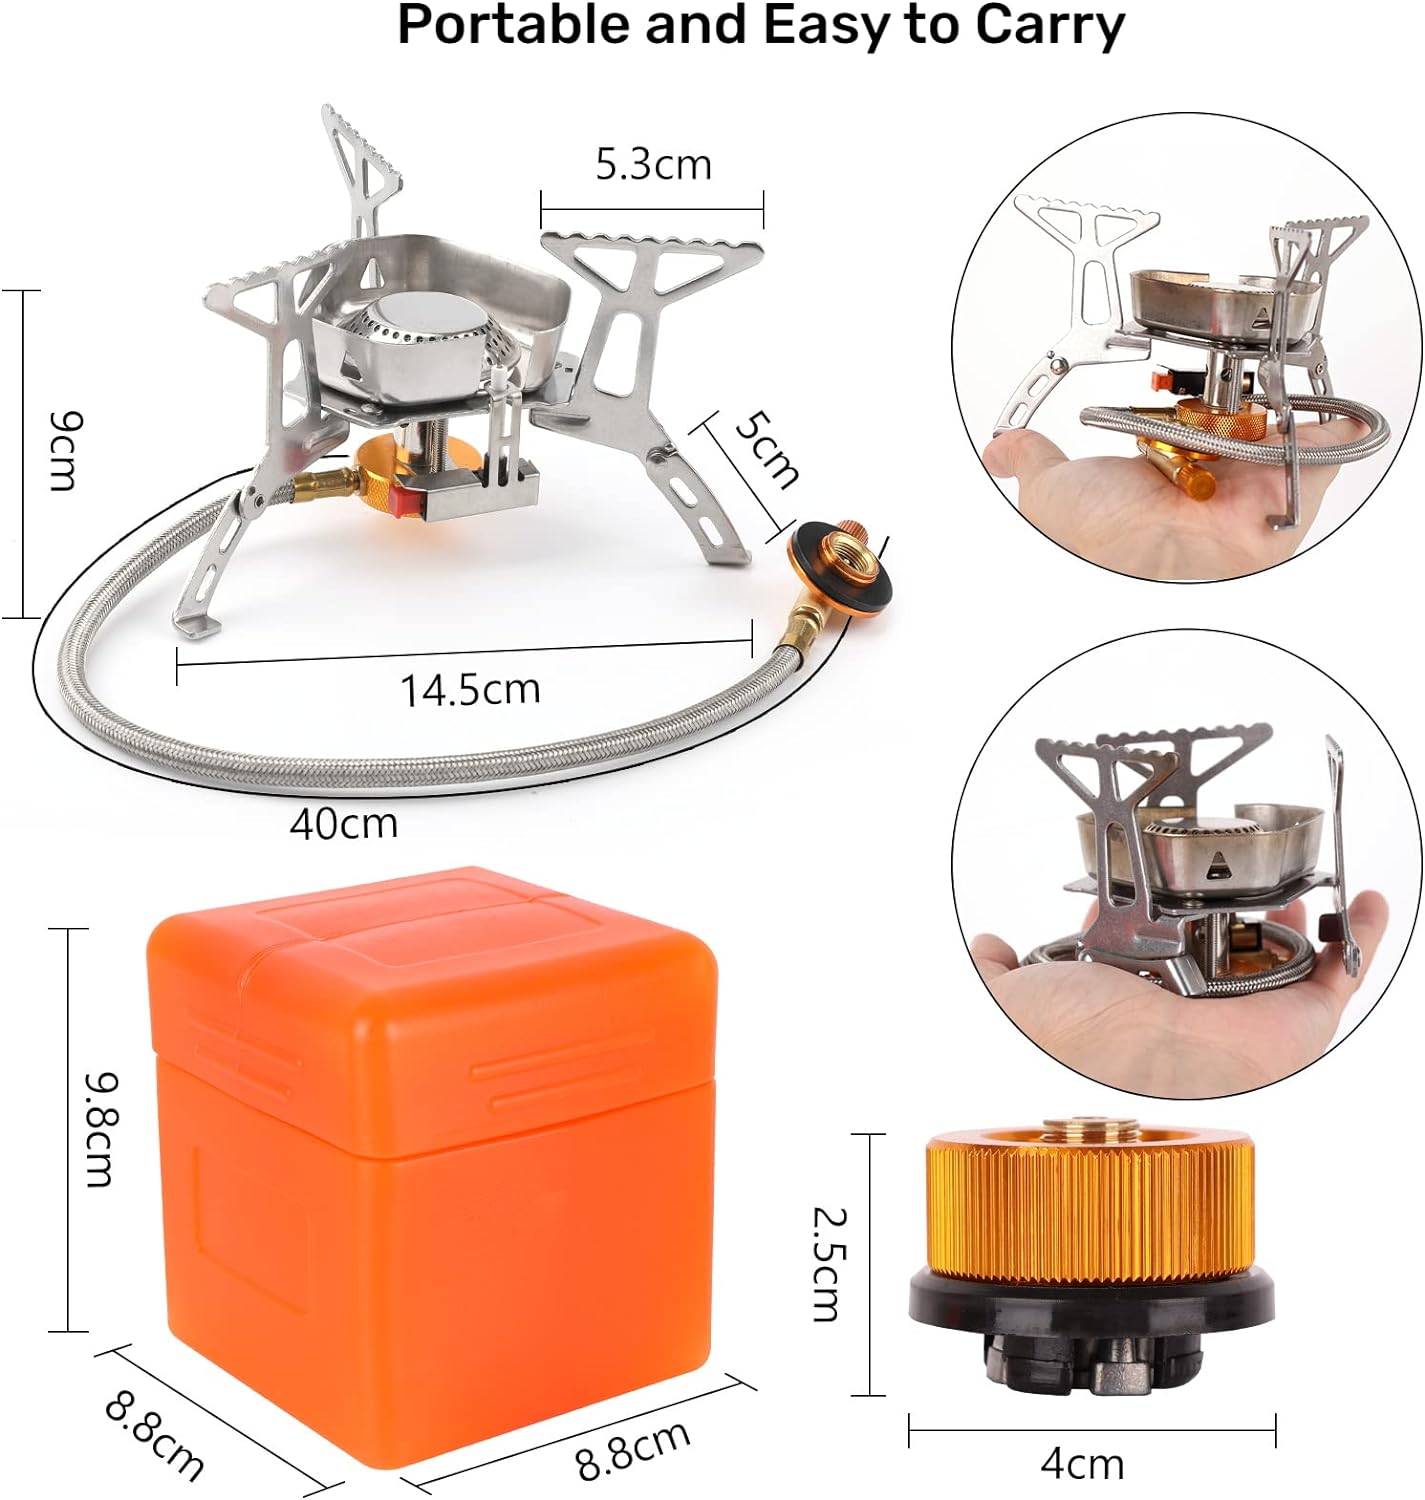 Camping Gas Stove, Portable Windproof Backpacking Burner Cooking Stoves 3500W for BBQ Outdoor Cooking Hiking Fishing Picnic with Piezo Ignition Adapters Converter